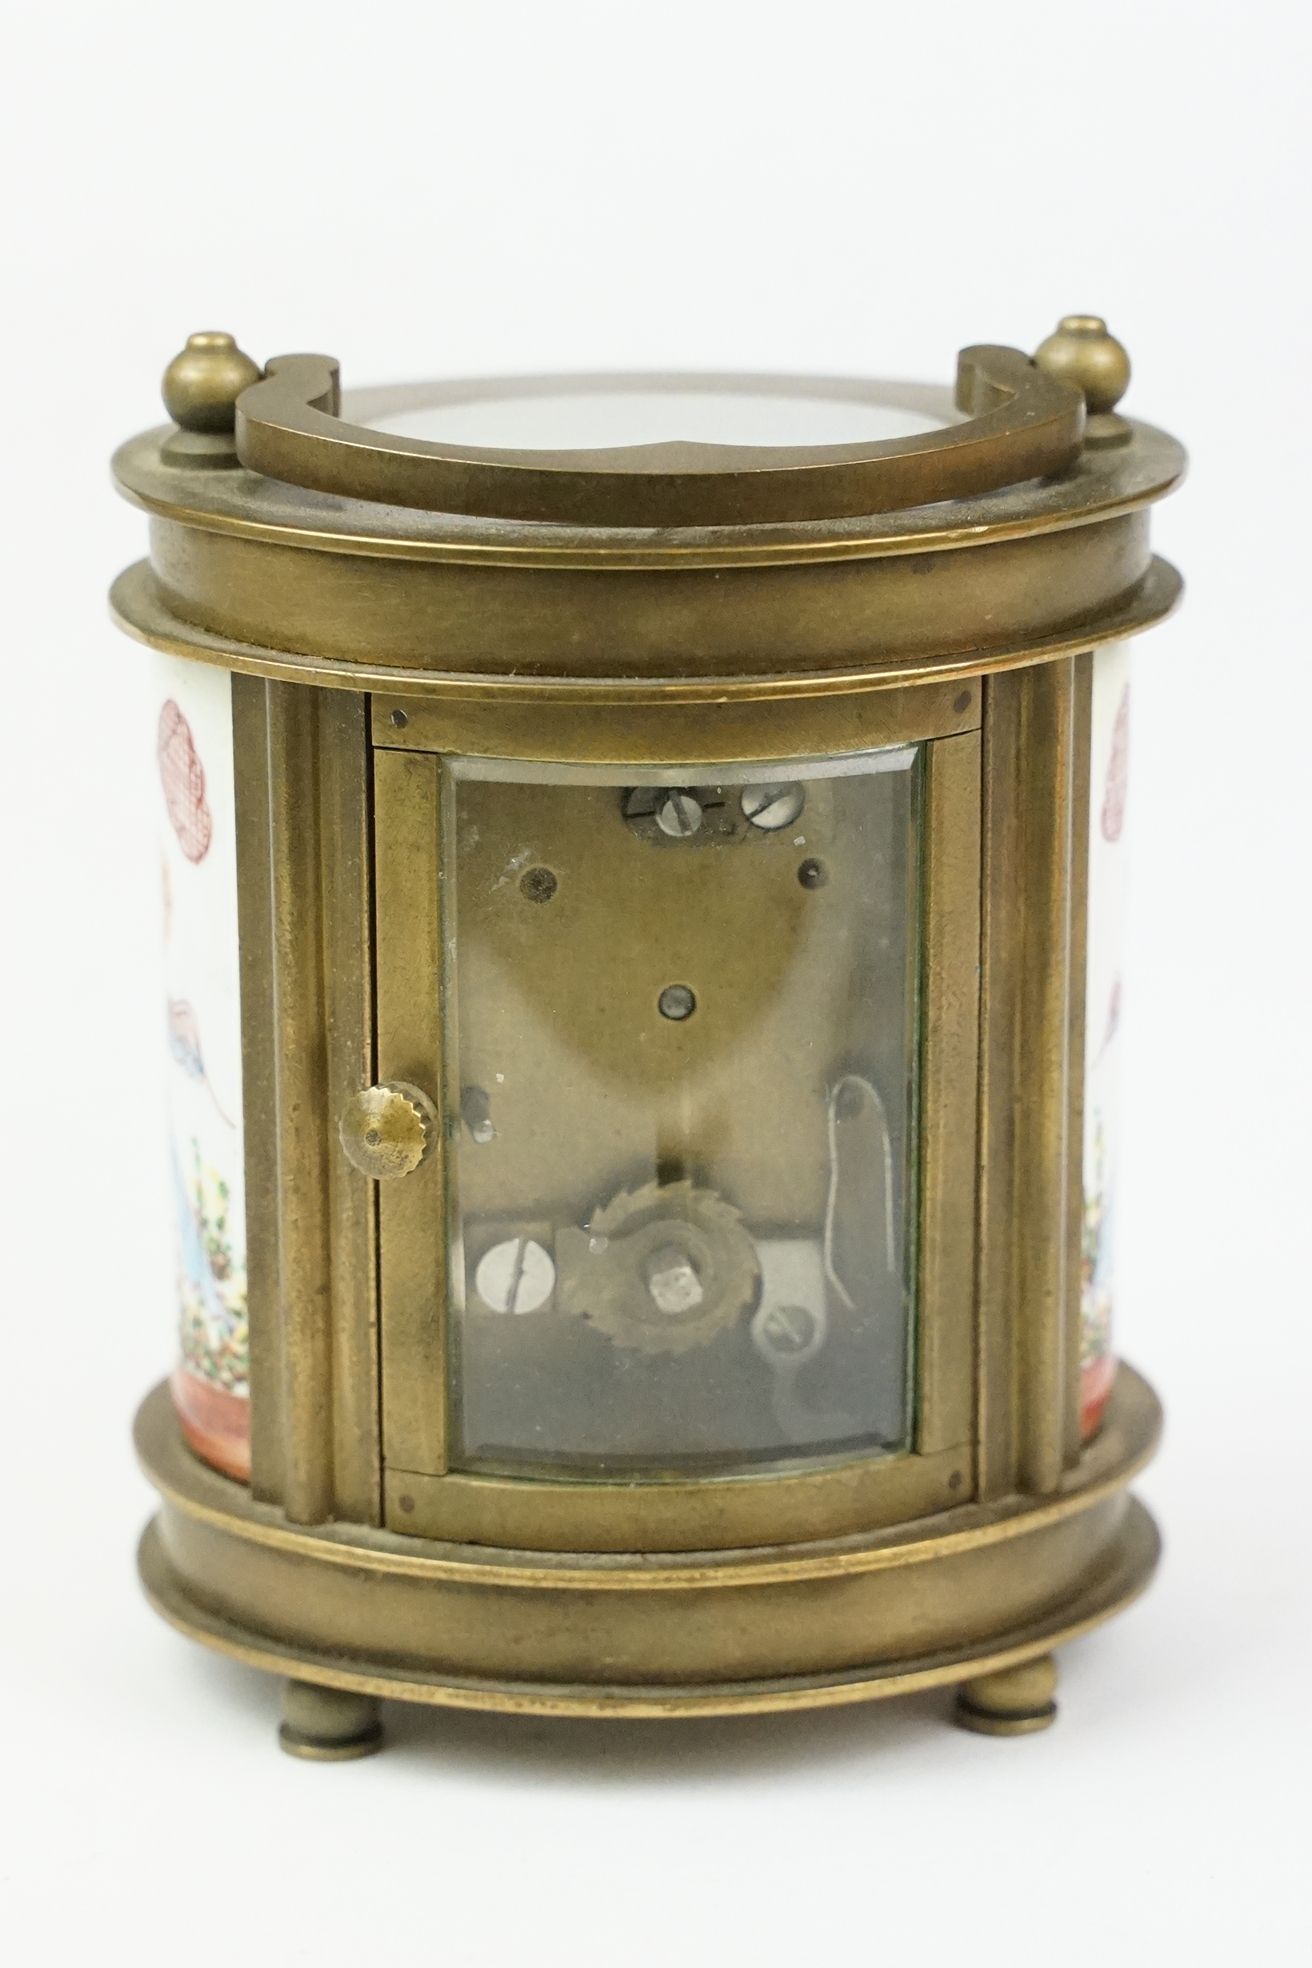 An antique French miniature carriage clock, brass cased with beveled glass panels, decorative Cherub - Image 6 of 10